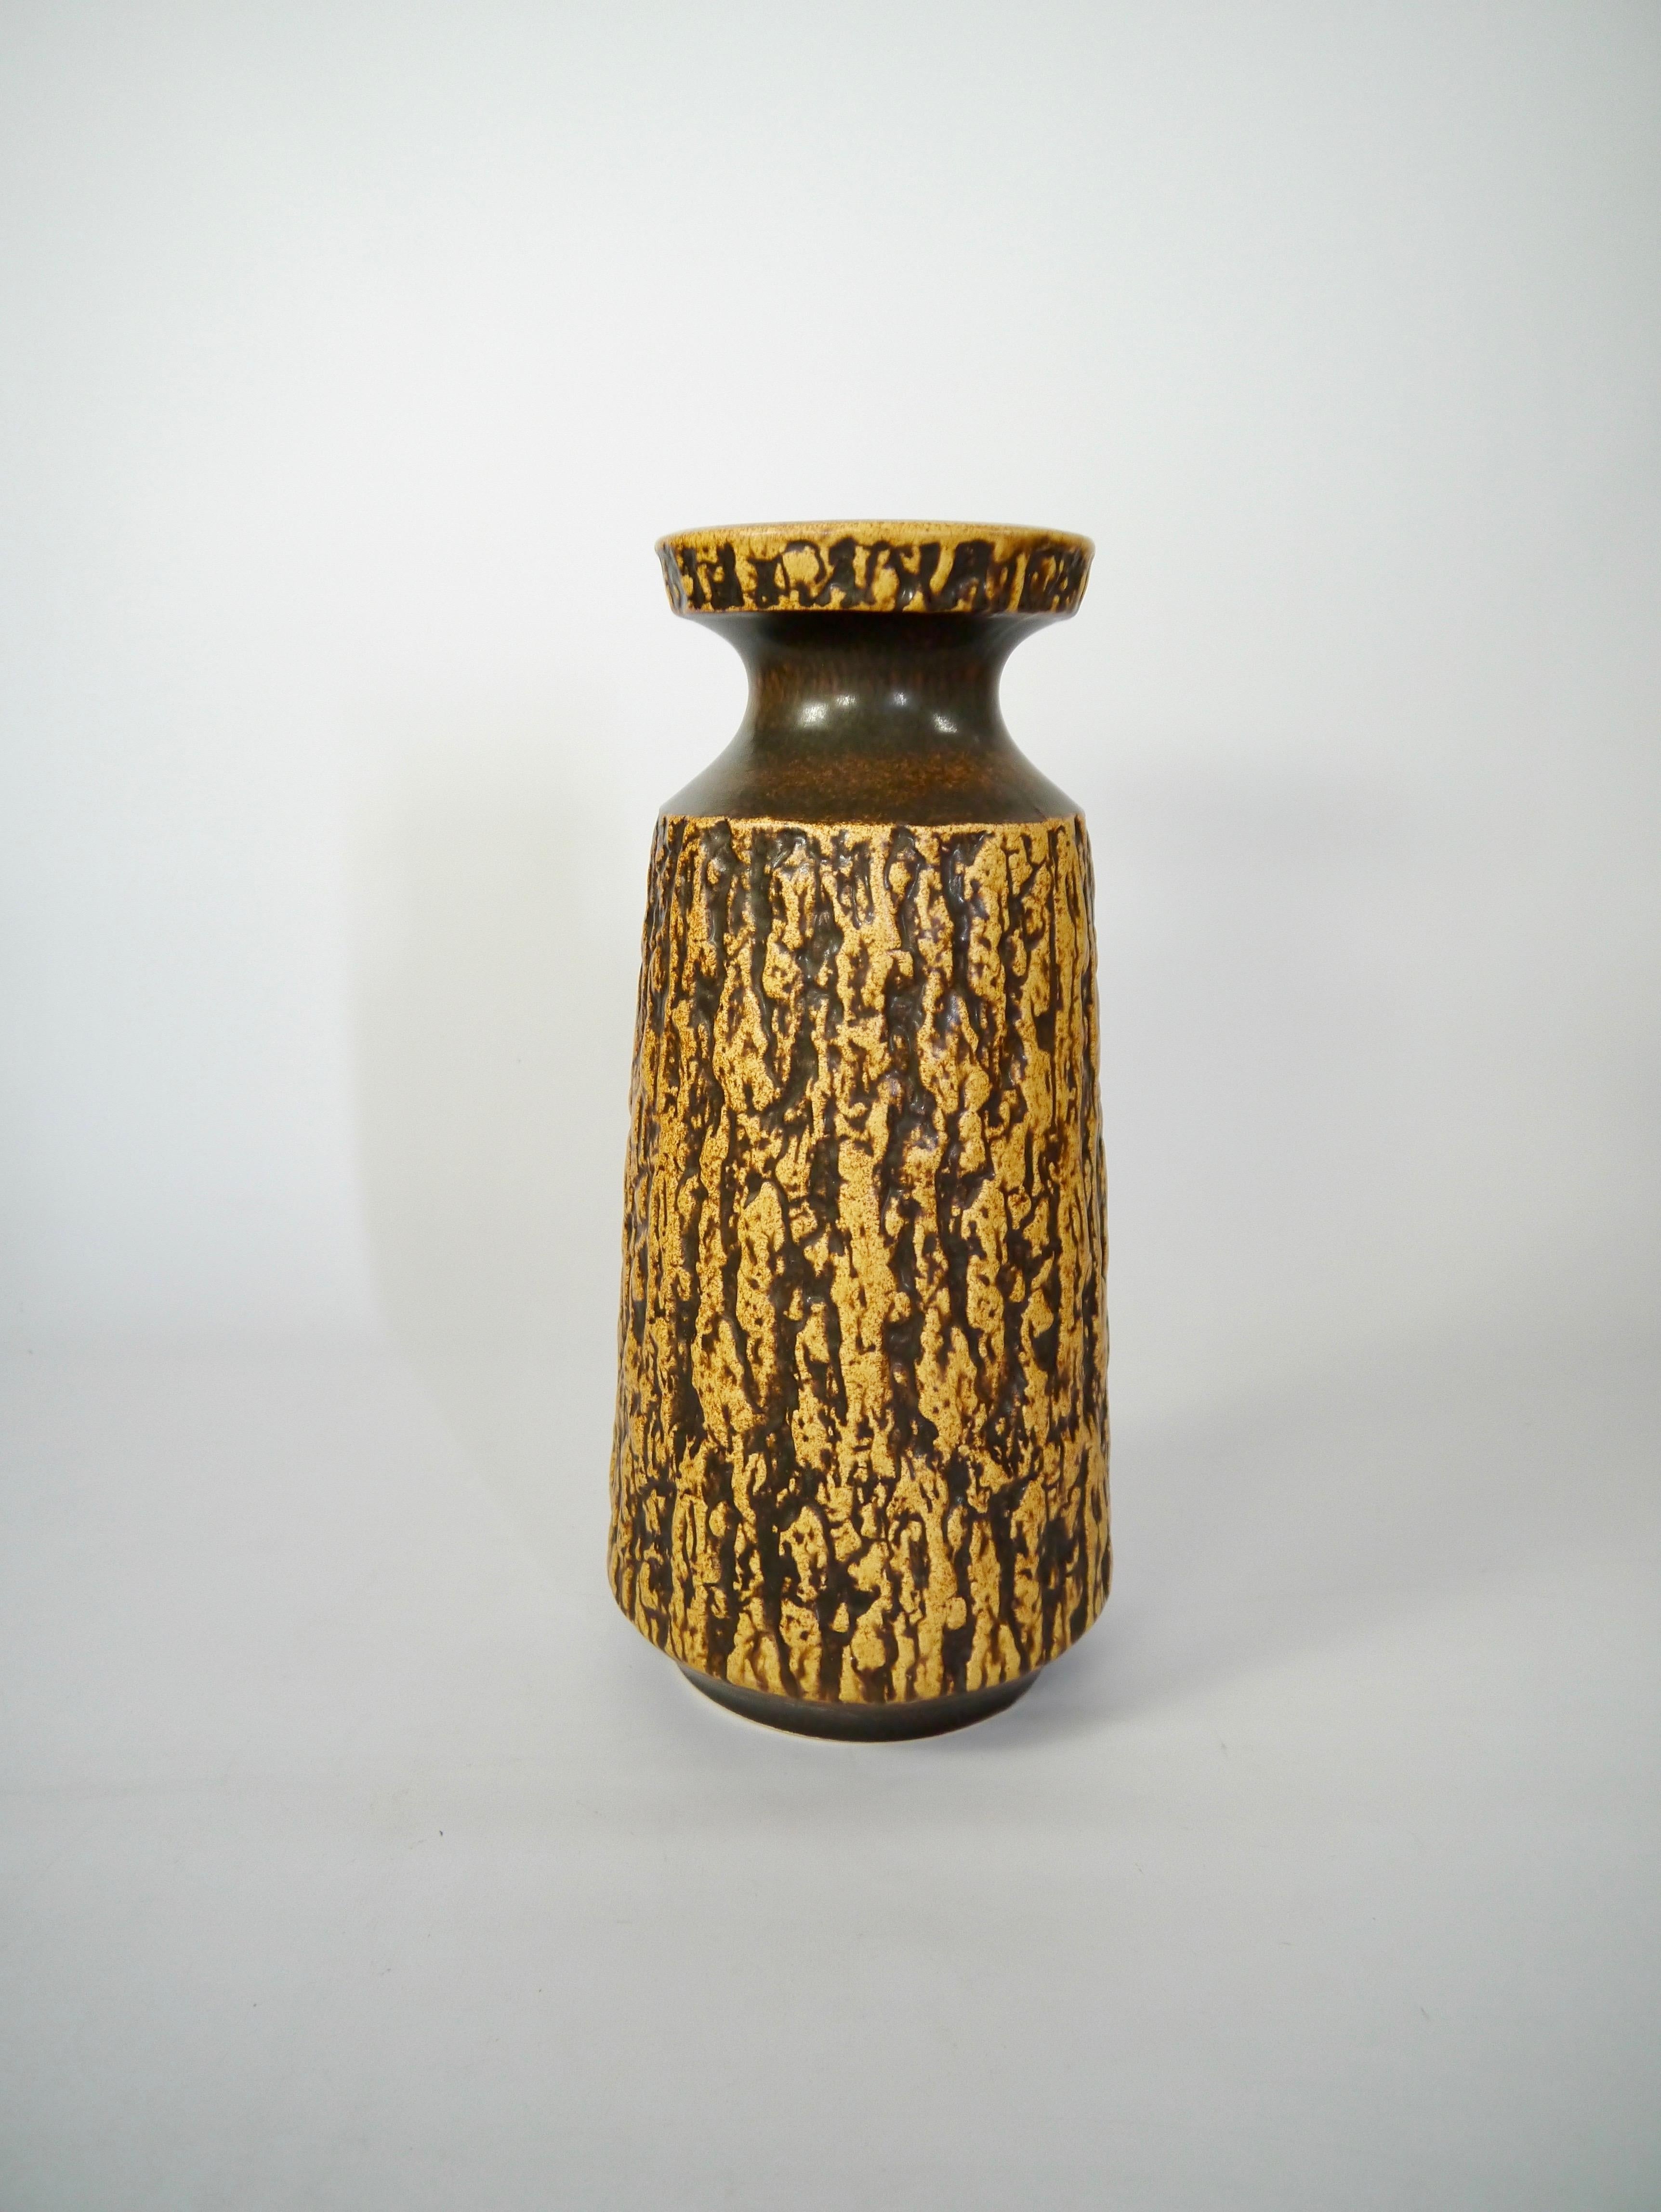 Tall fat lava floor vase produced by Jasba in the 1960s. Organic shape pattern, mimicking pine tree bark. Color and pattern very wabi-sabi.